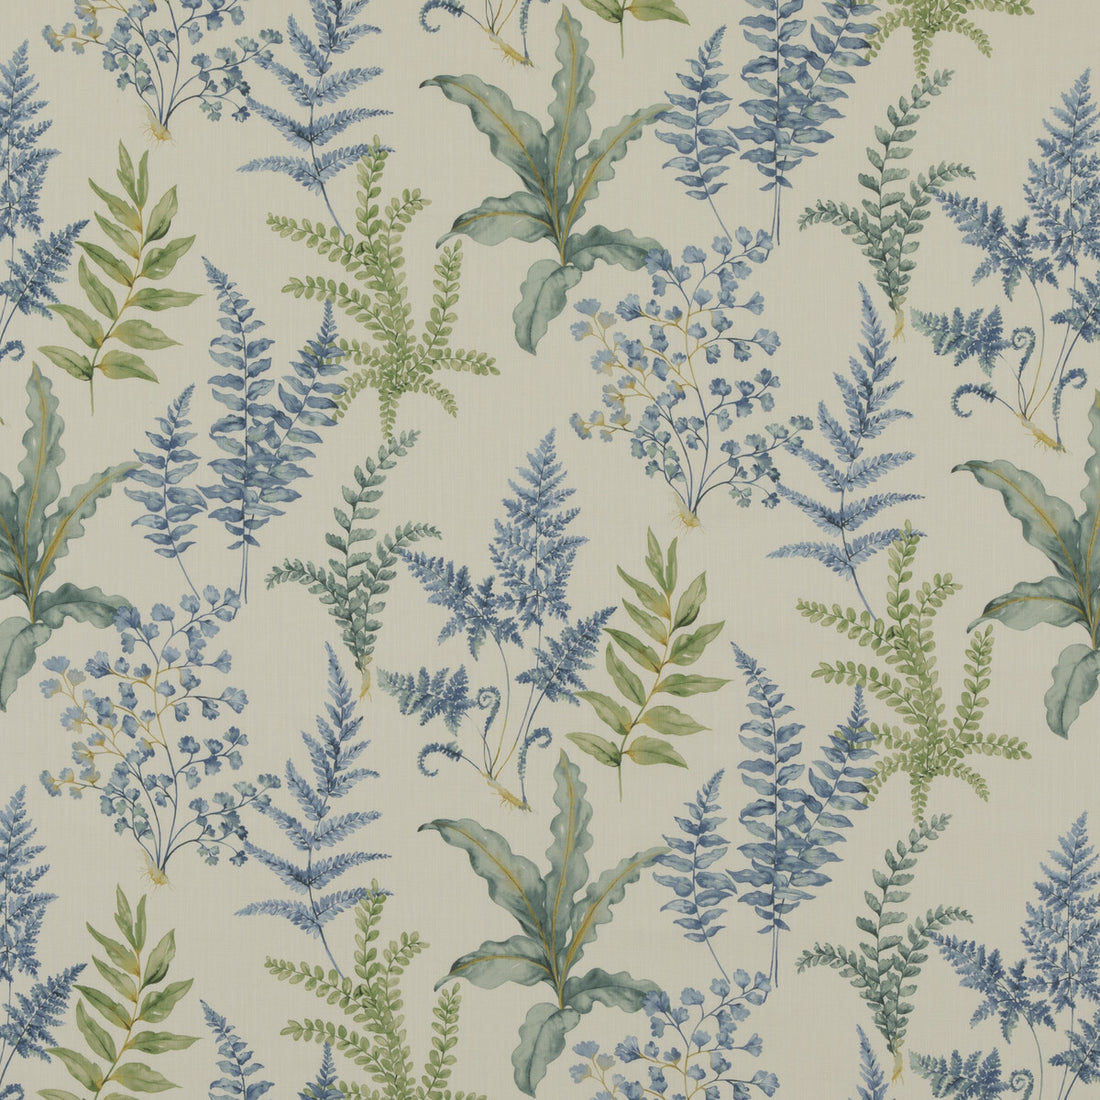 Ferndown fabric in blue color - pattern PP50503.1.0 - by Baker Lifestyle in the Bridport collection